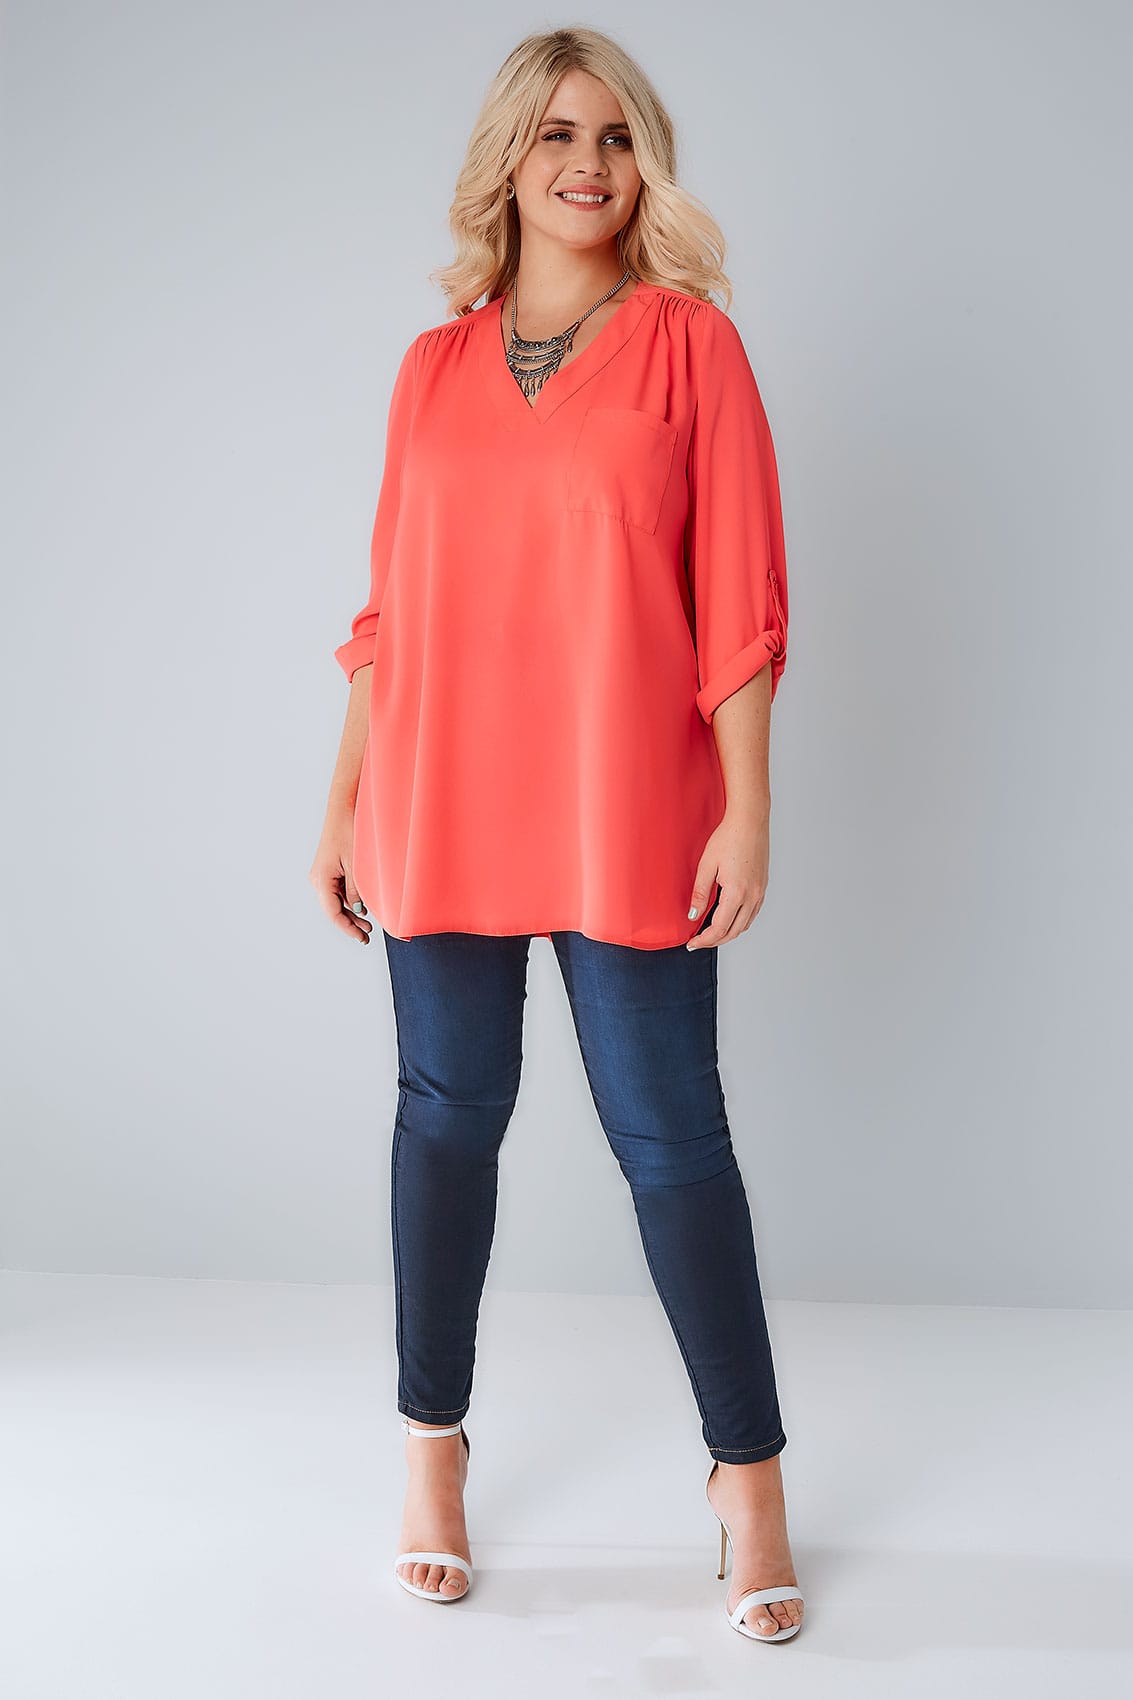 Coral Woven V-Neck Blouse With Pocket, Plus size 16 to 32